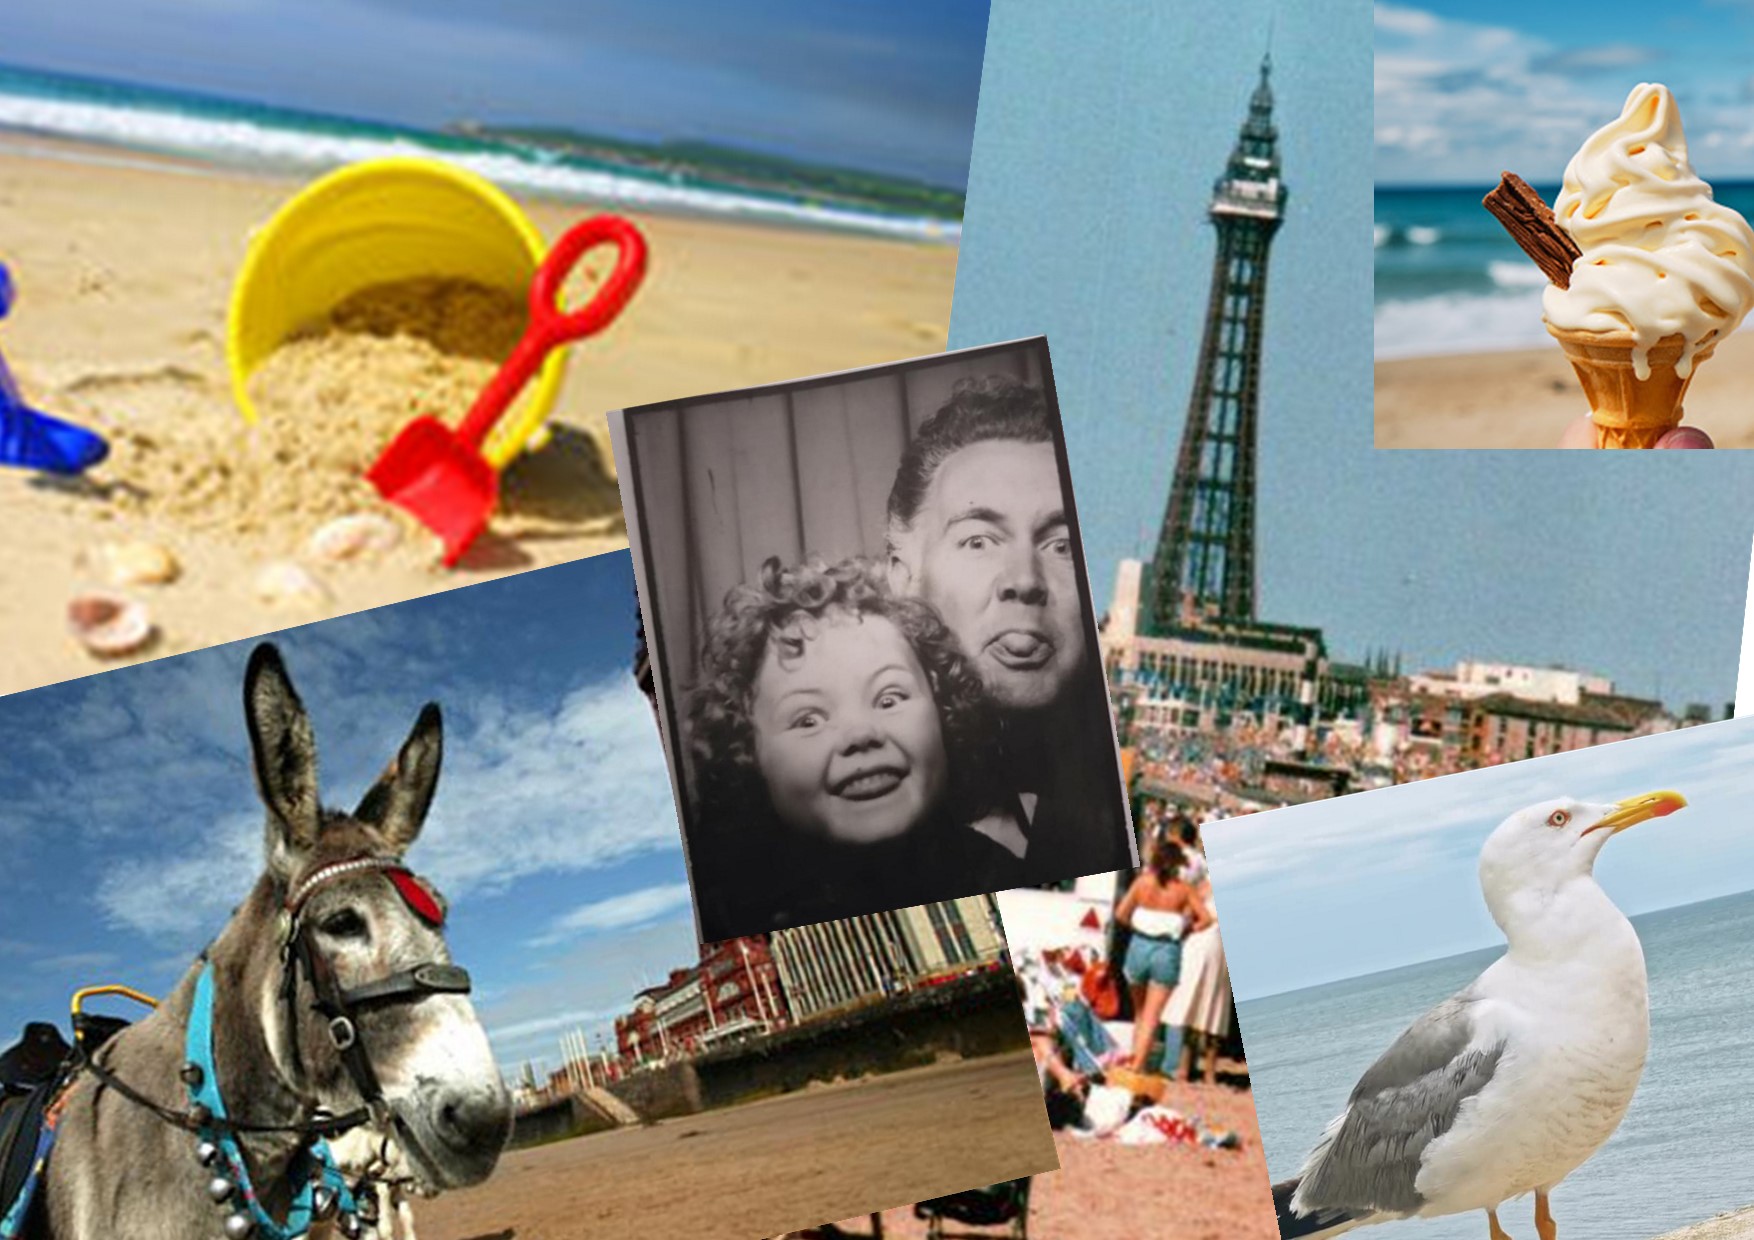 Seaside images collage, with Maria as a child in the middle